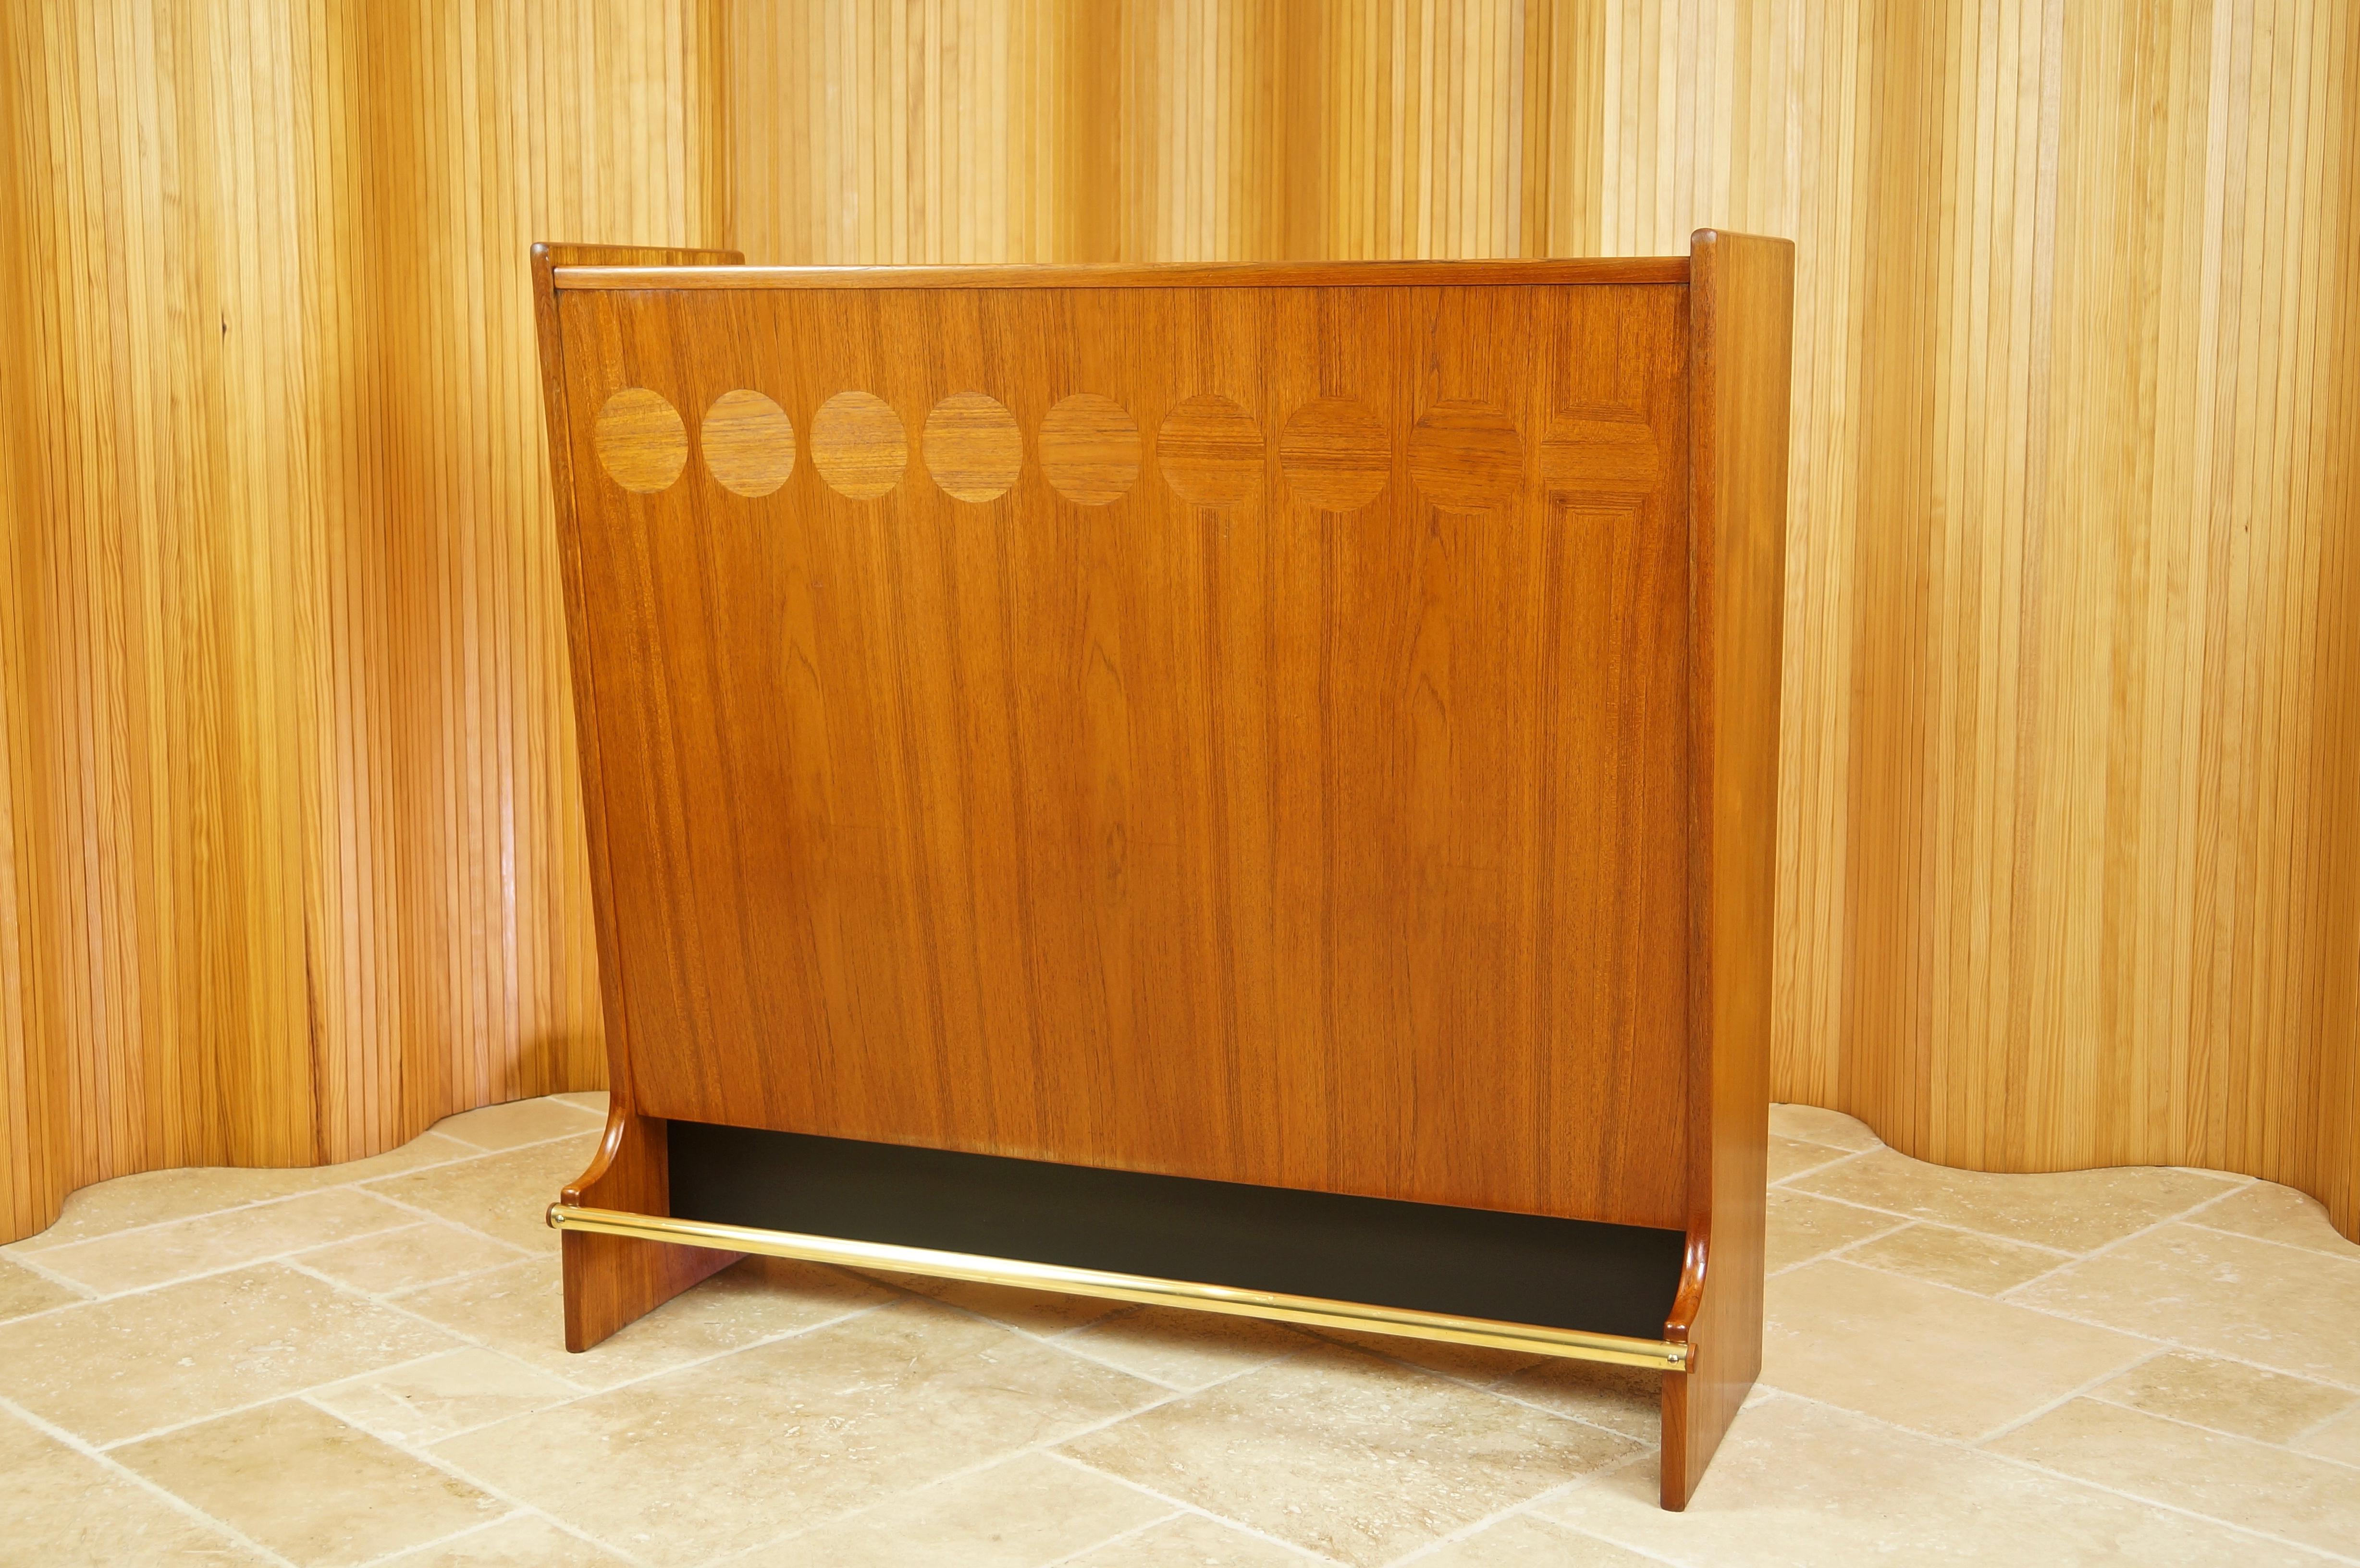 Vintage teak dry bar by Johannes Andersen for J. Skaaning & Søn, 1966, Denmark - Model SK661.

This is an absolutely stunning piece of furniture, a beautiful example of high quality craftsmanship.

The freestanding bar is in excellent condition